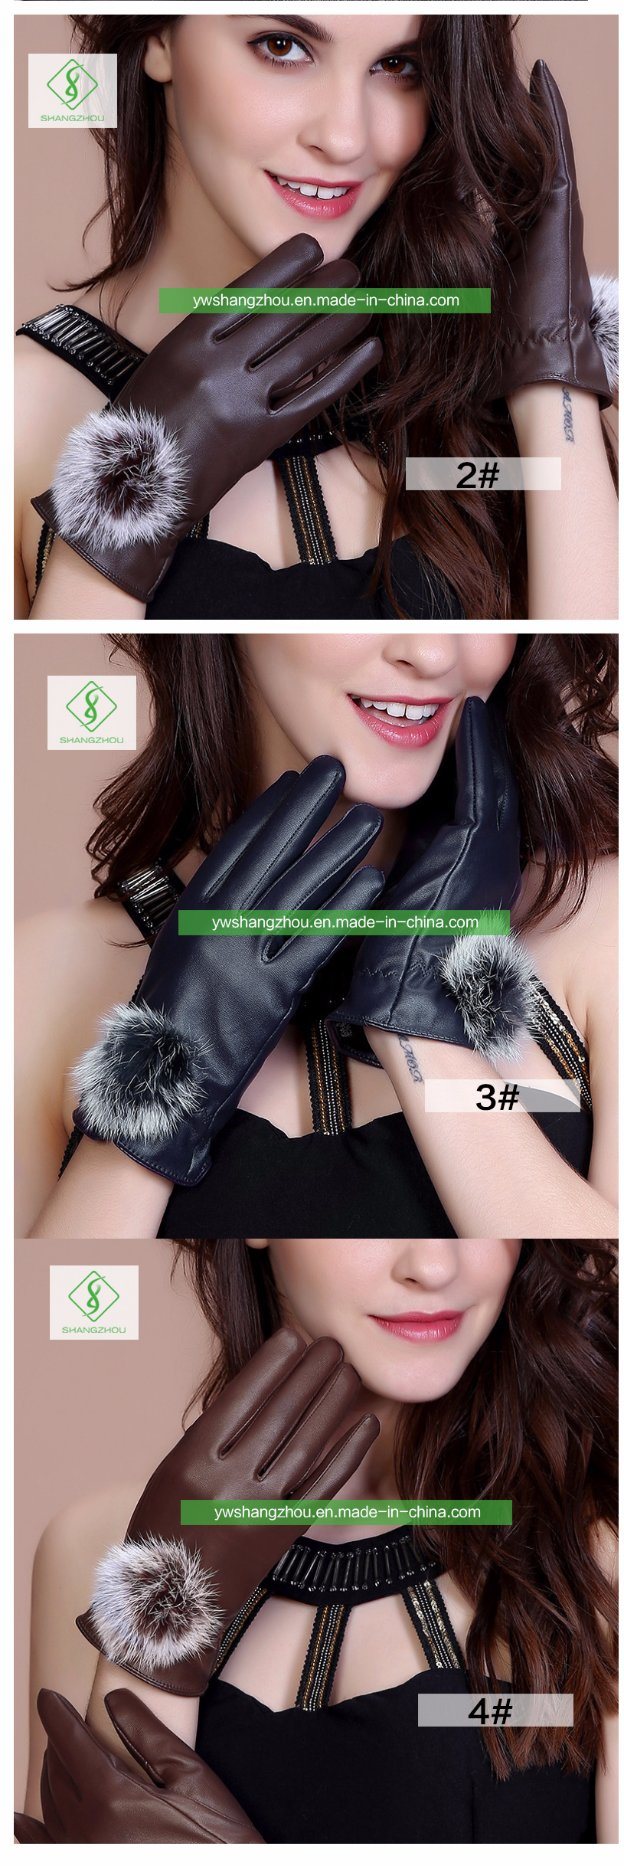 Top Sell Fashion Ladies PU Touch Screen Gloves Average Size Autumn&Winter